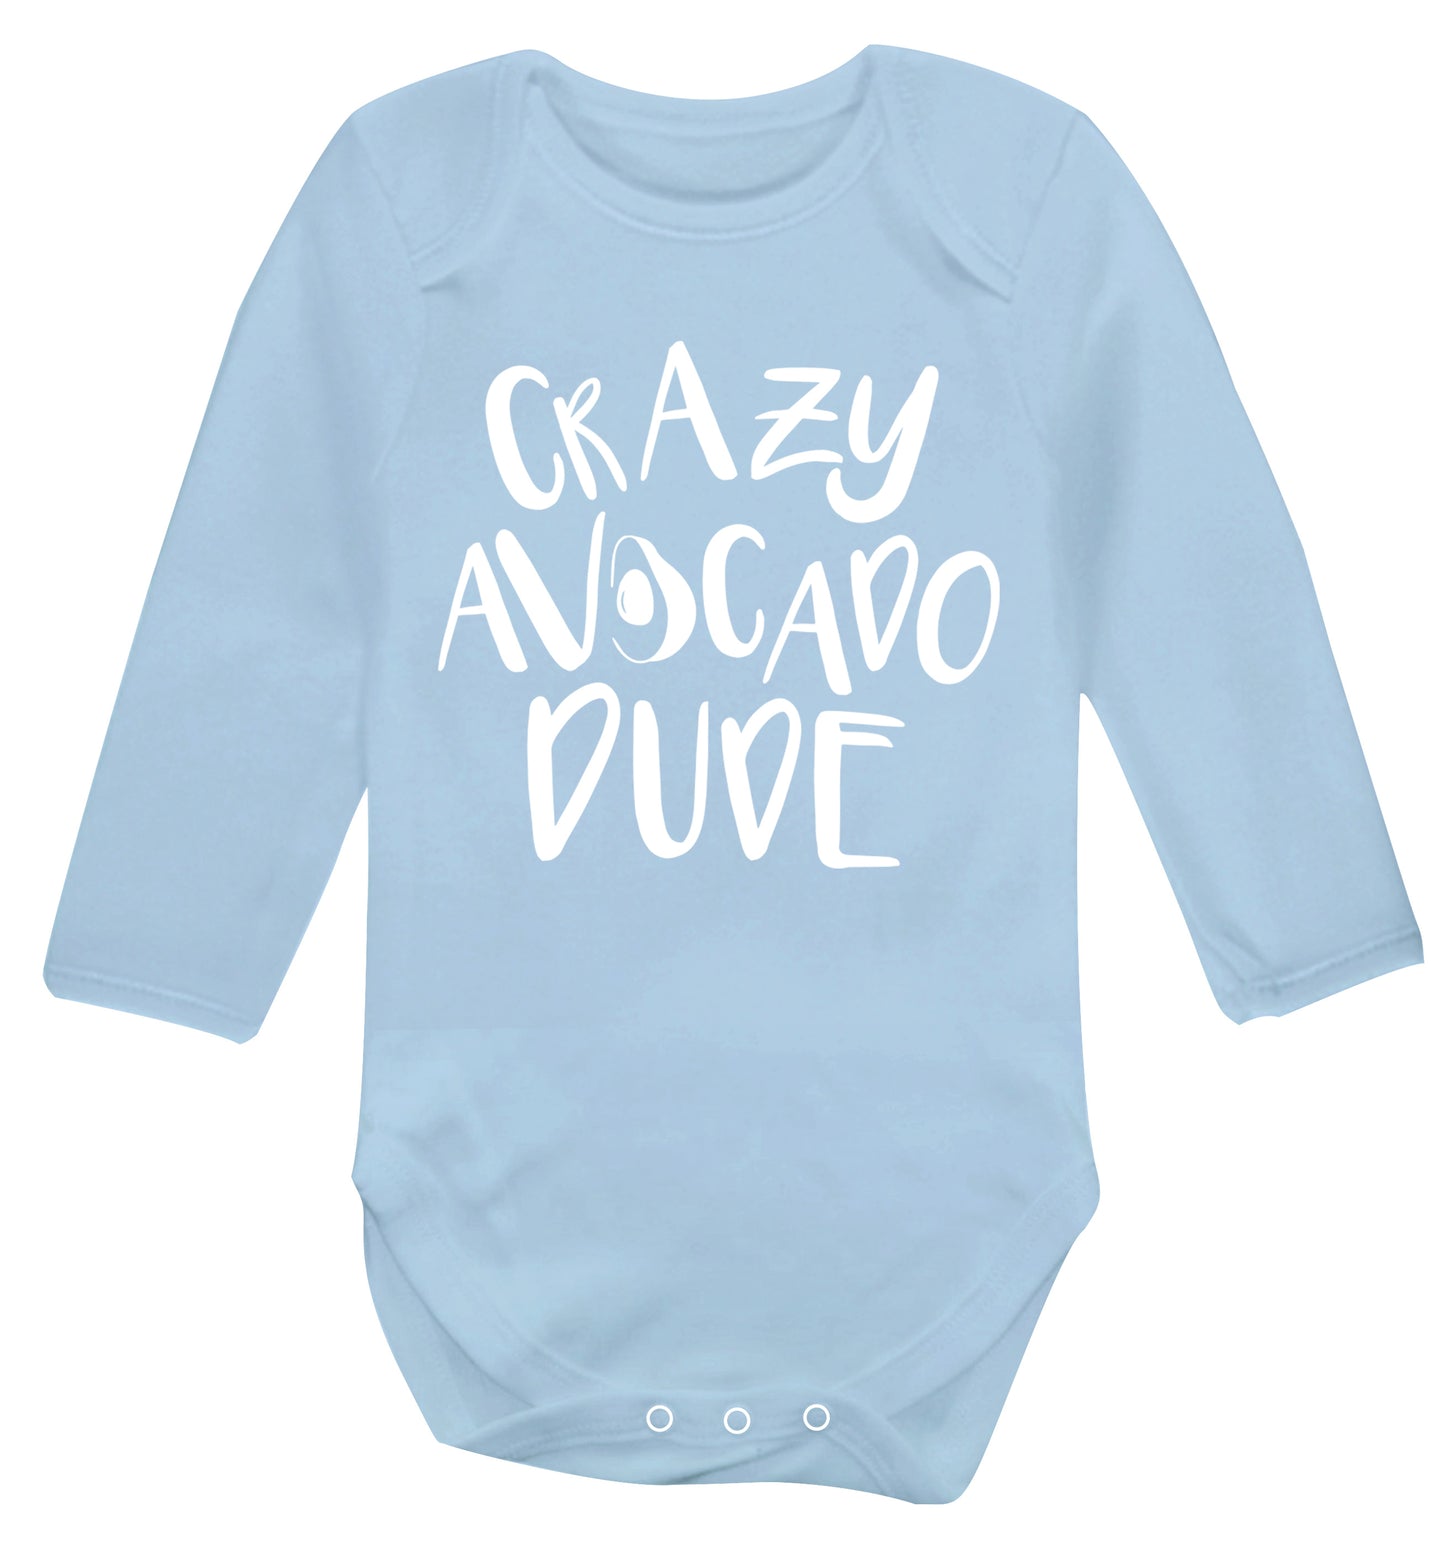 Crazy avocado dude Baby Vest long sleeved pale blue 6-12 months